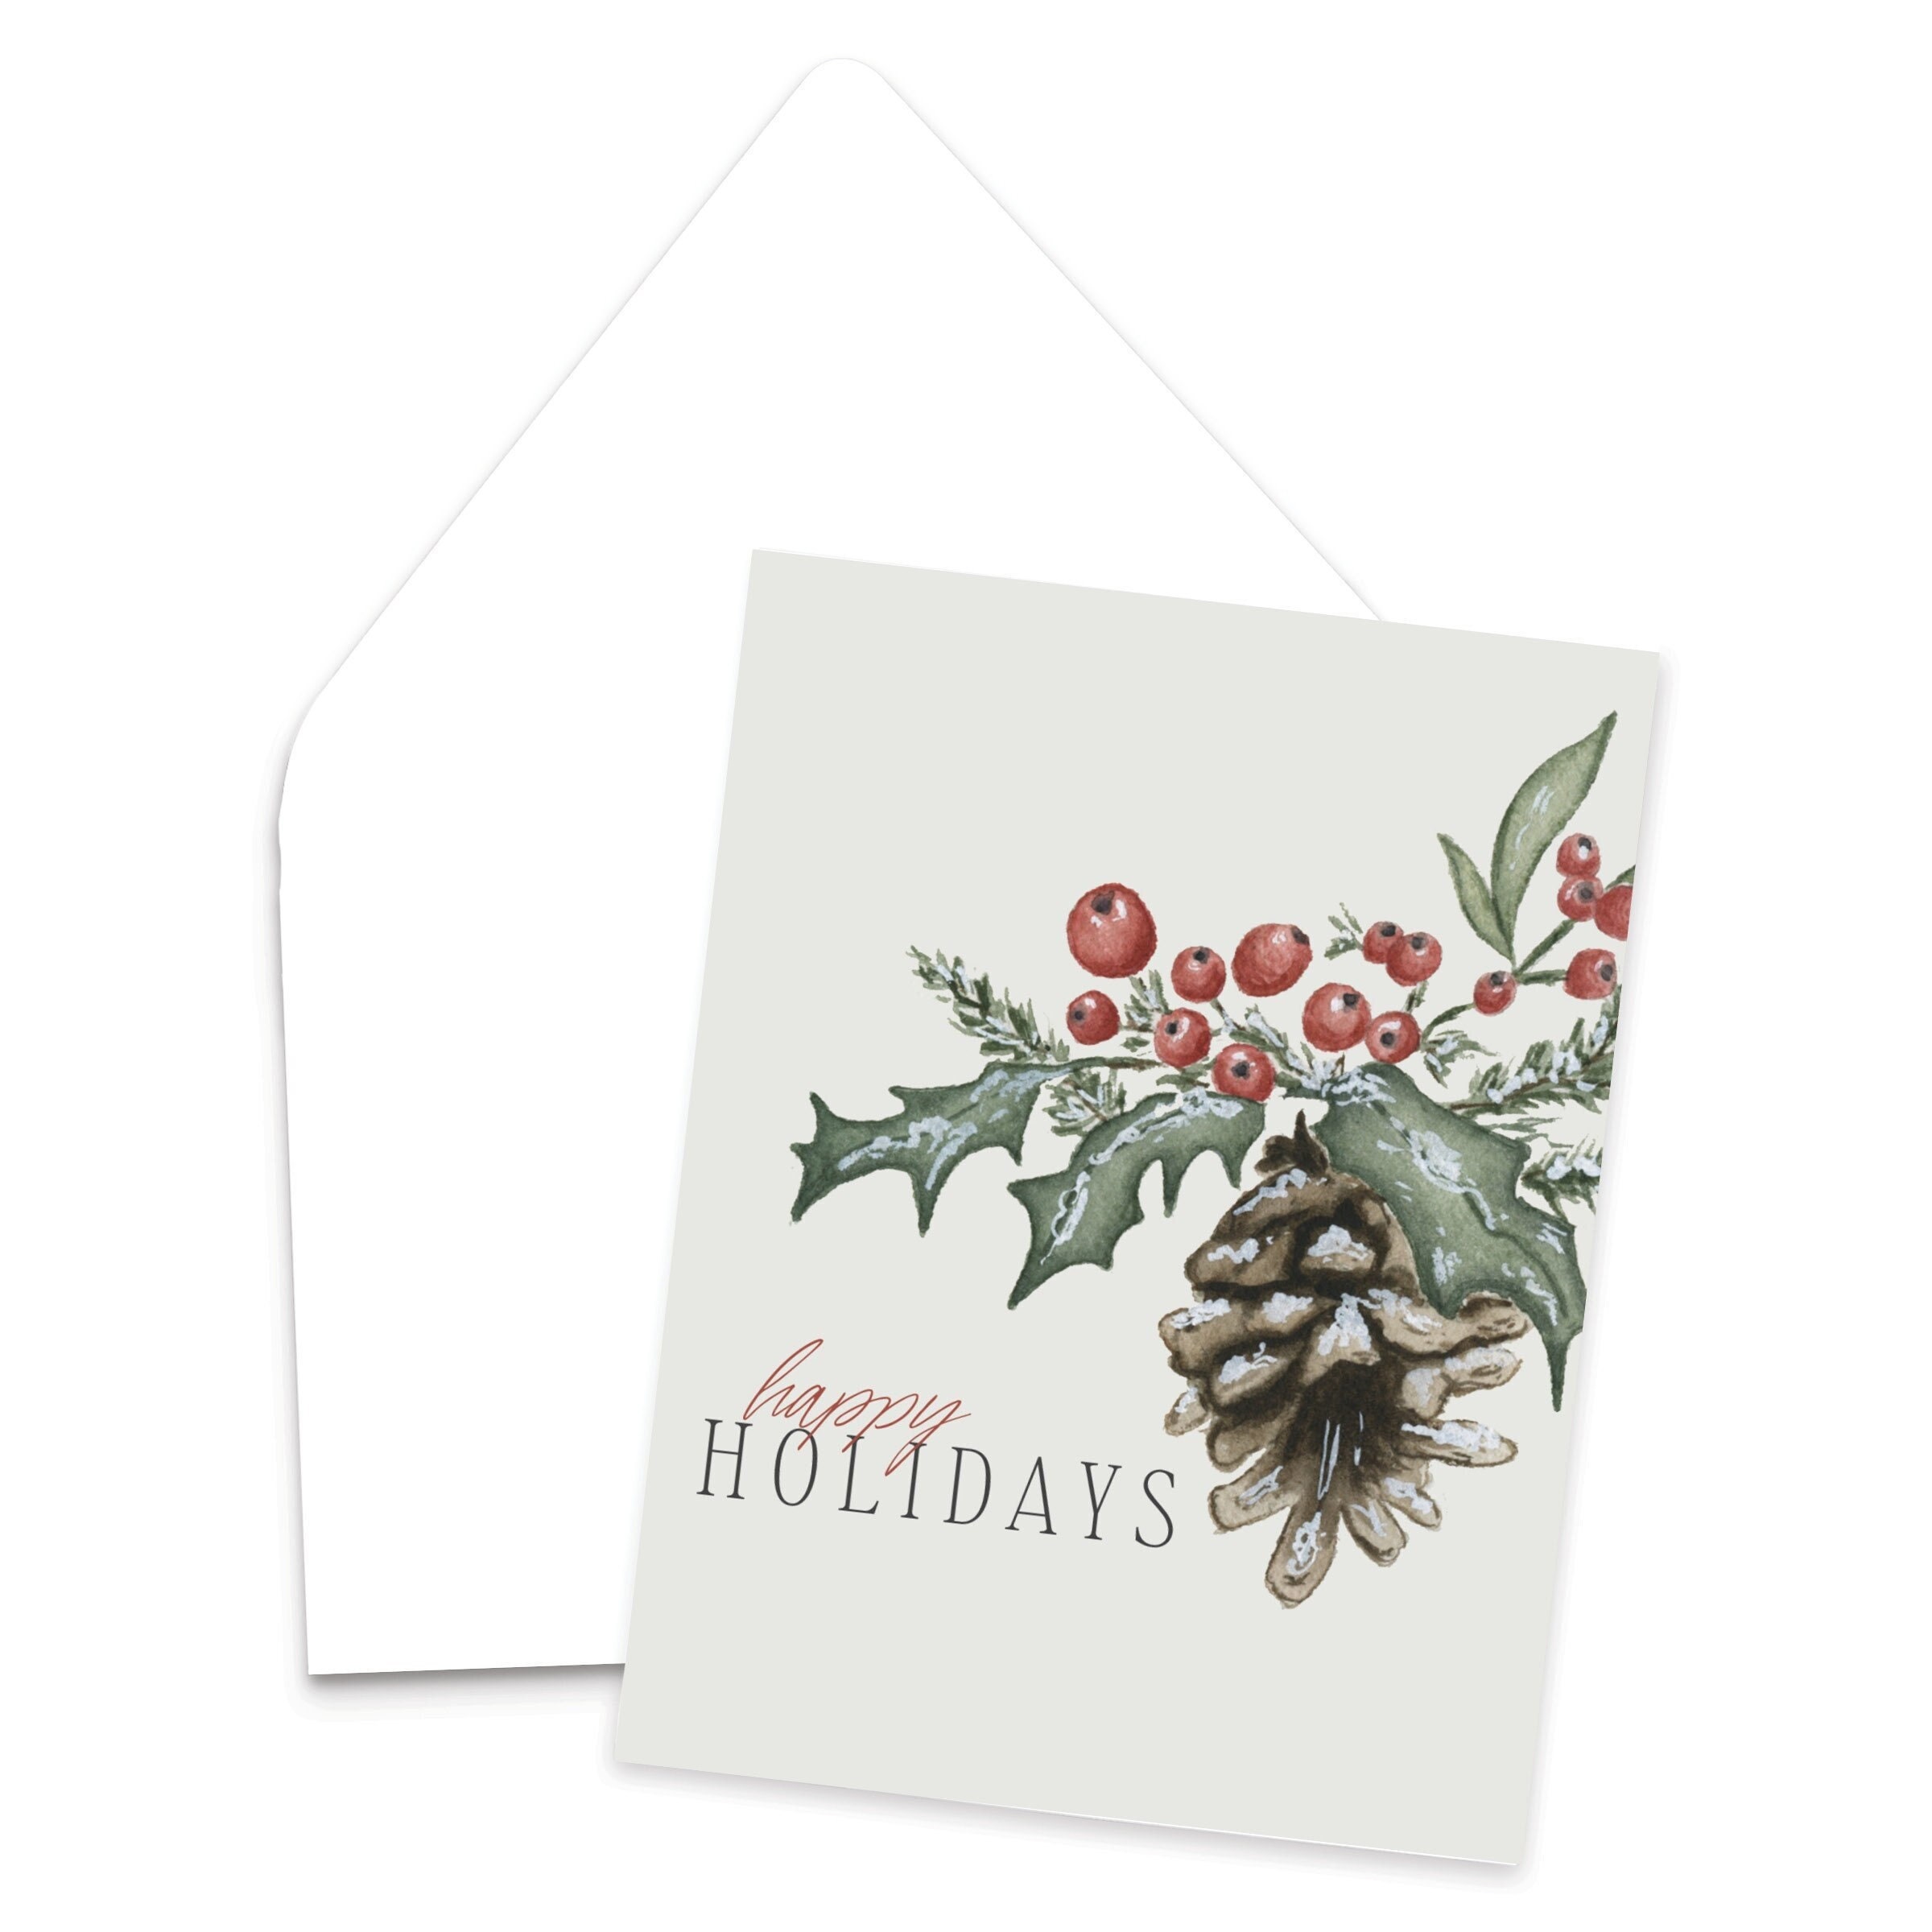 Custom Christmas & Holiday Cards, 5x7 Cardstock, Blank Envelope, Glowing  Holly